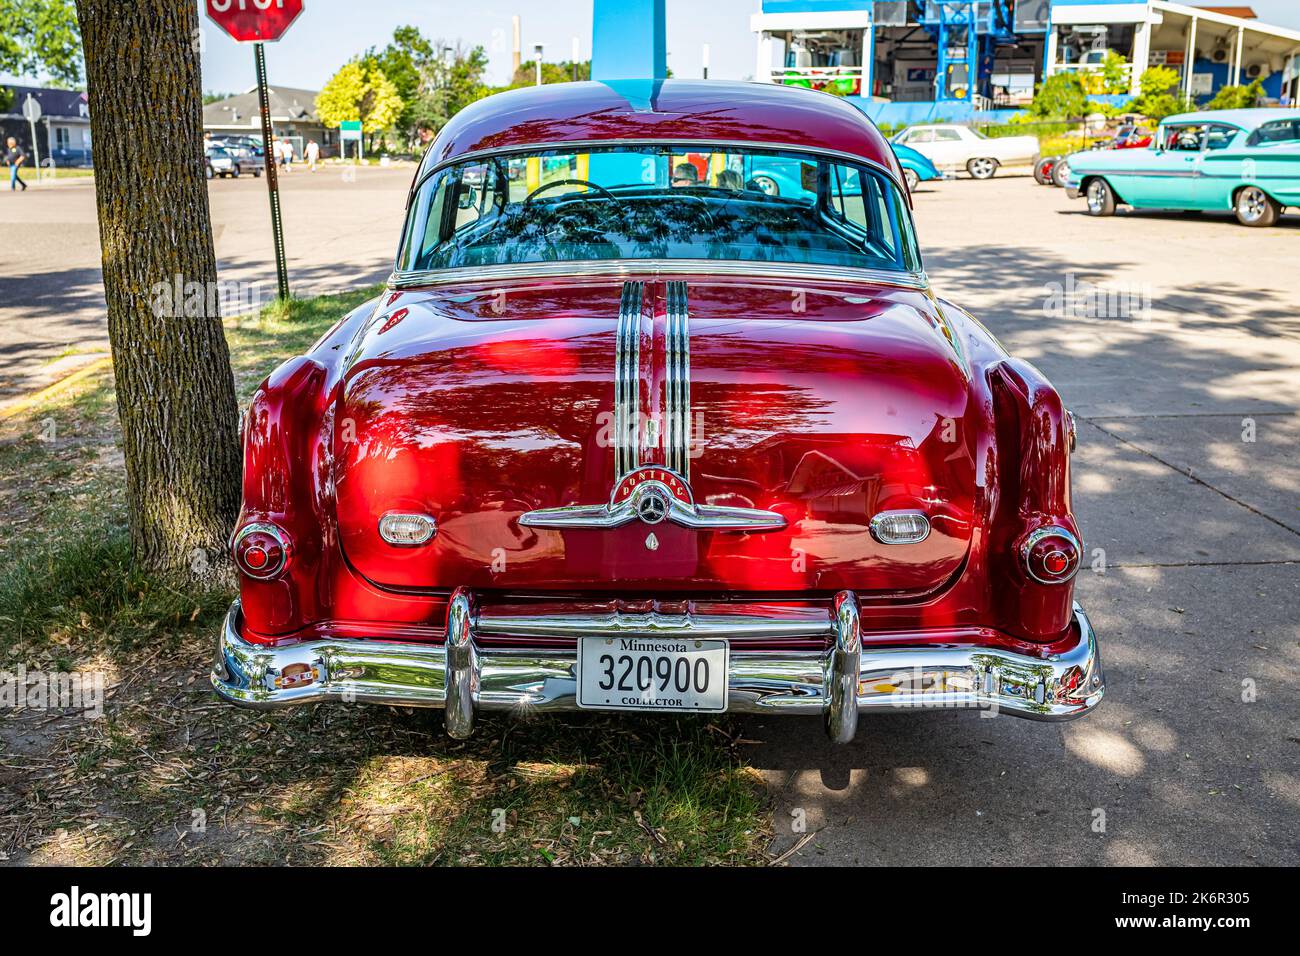 Falcon Heights, MN - June 19, 2022: High perspective rear view of a 1953 Pontiac Chieftain 2 Door Sedan at a local car show. Stock Photo